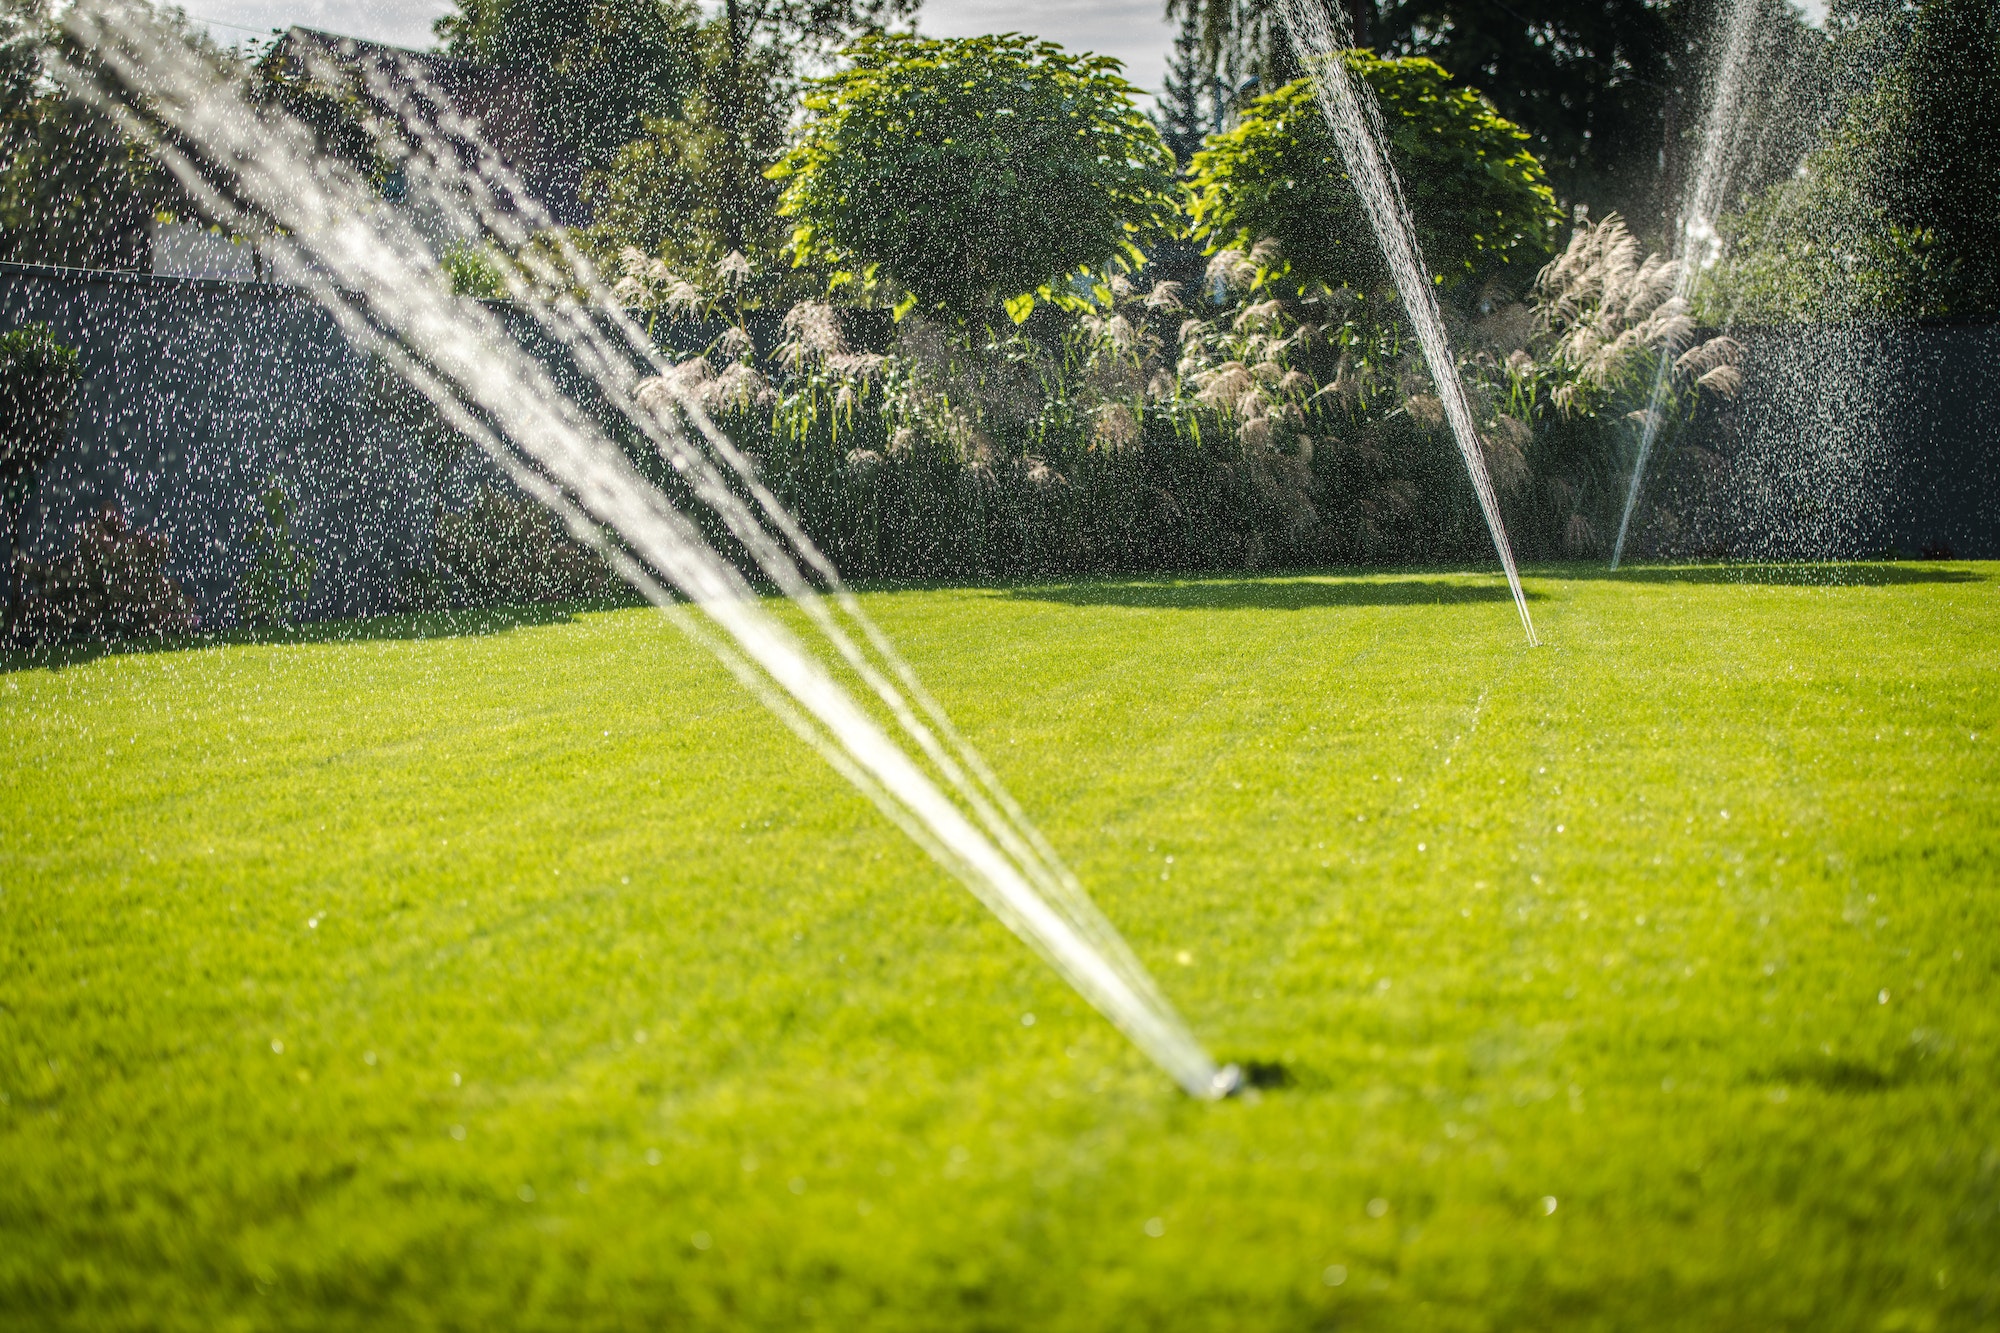 Lawn Irrigation System in Operation